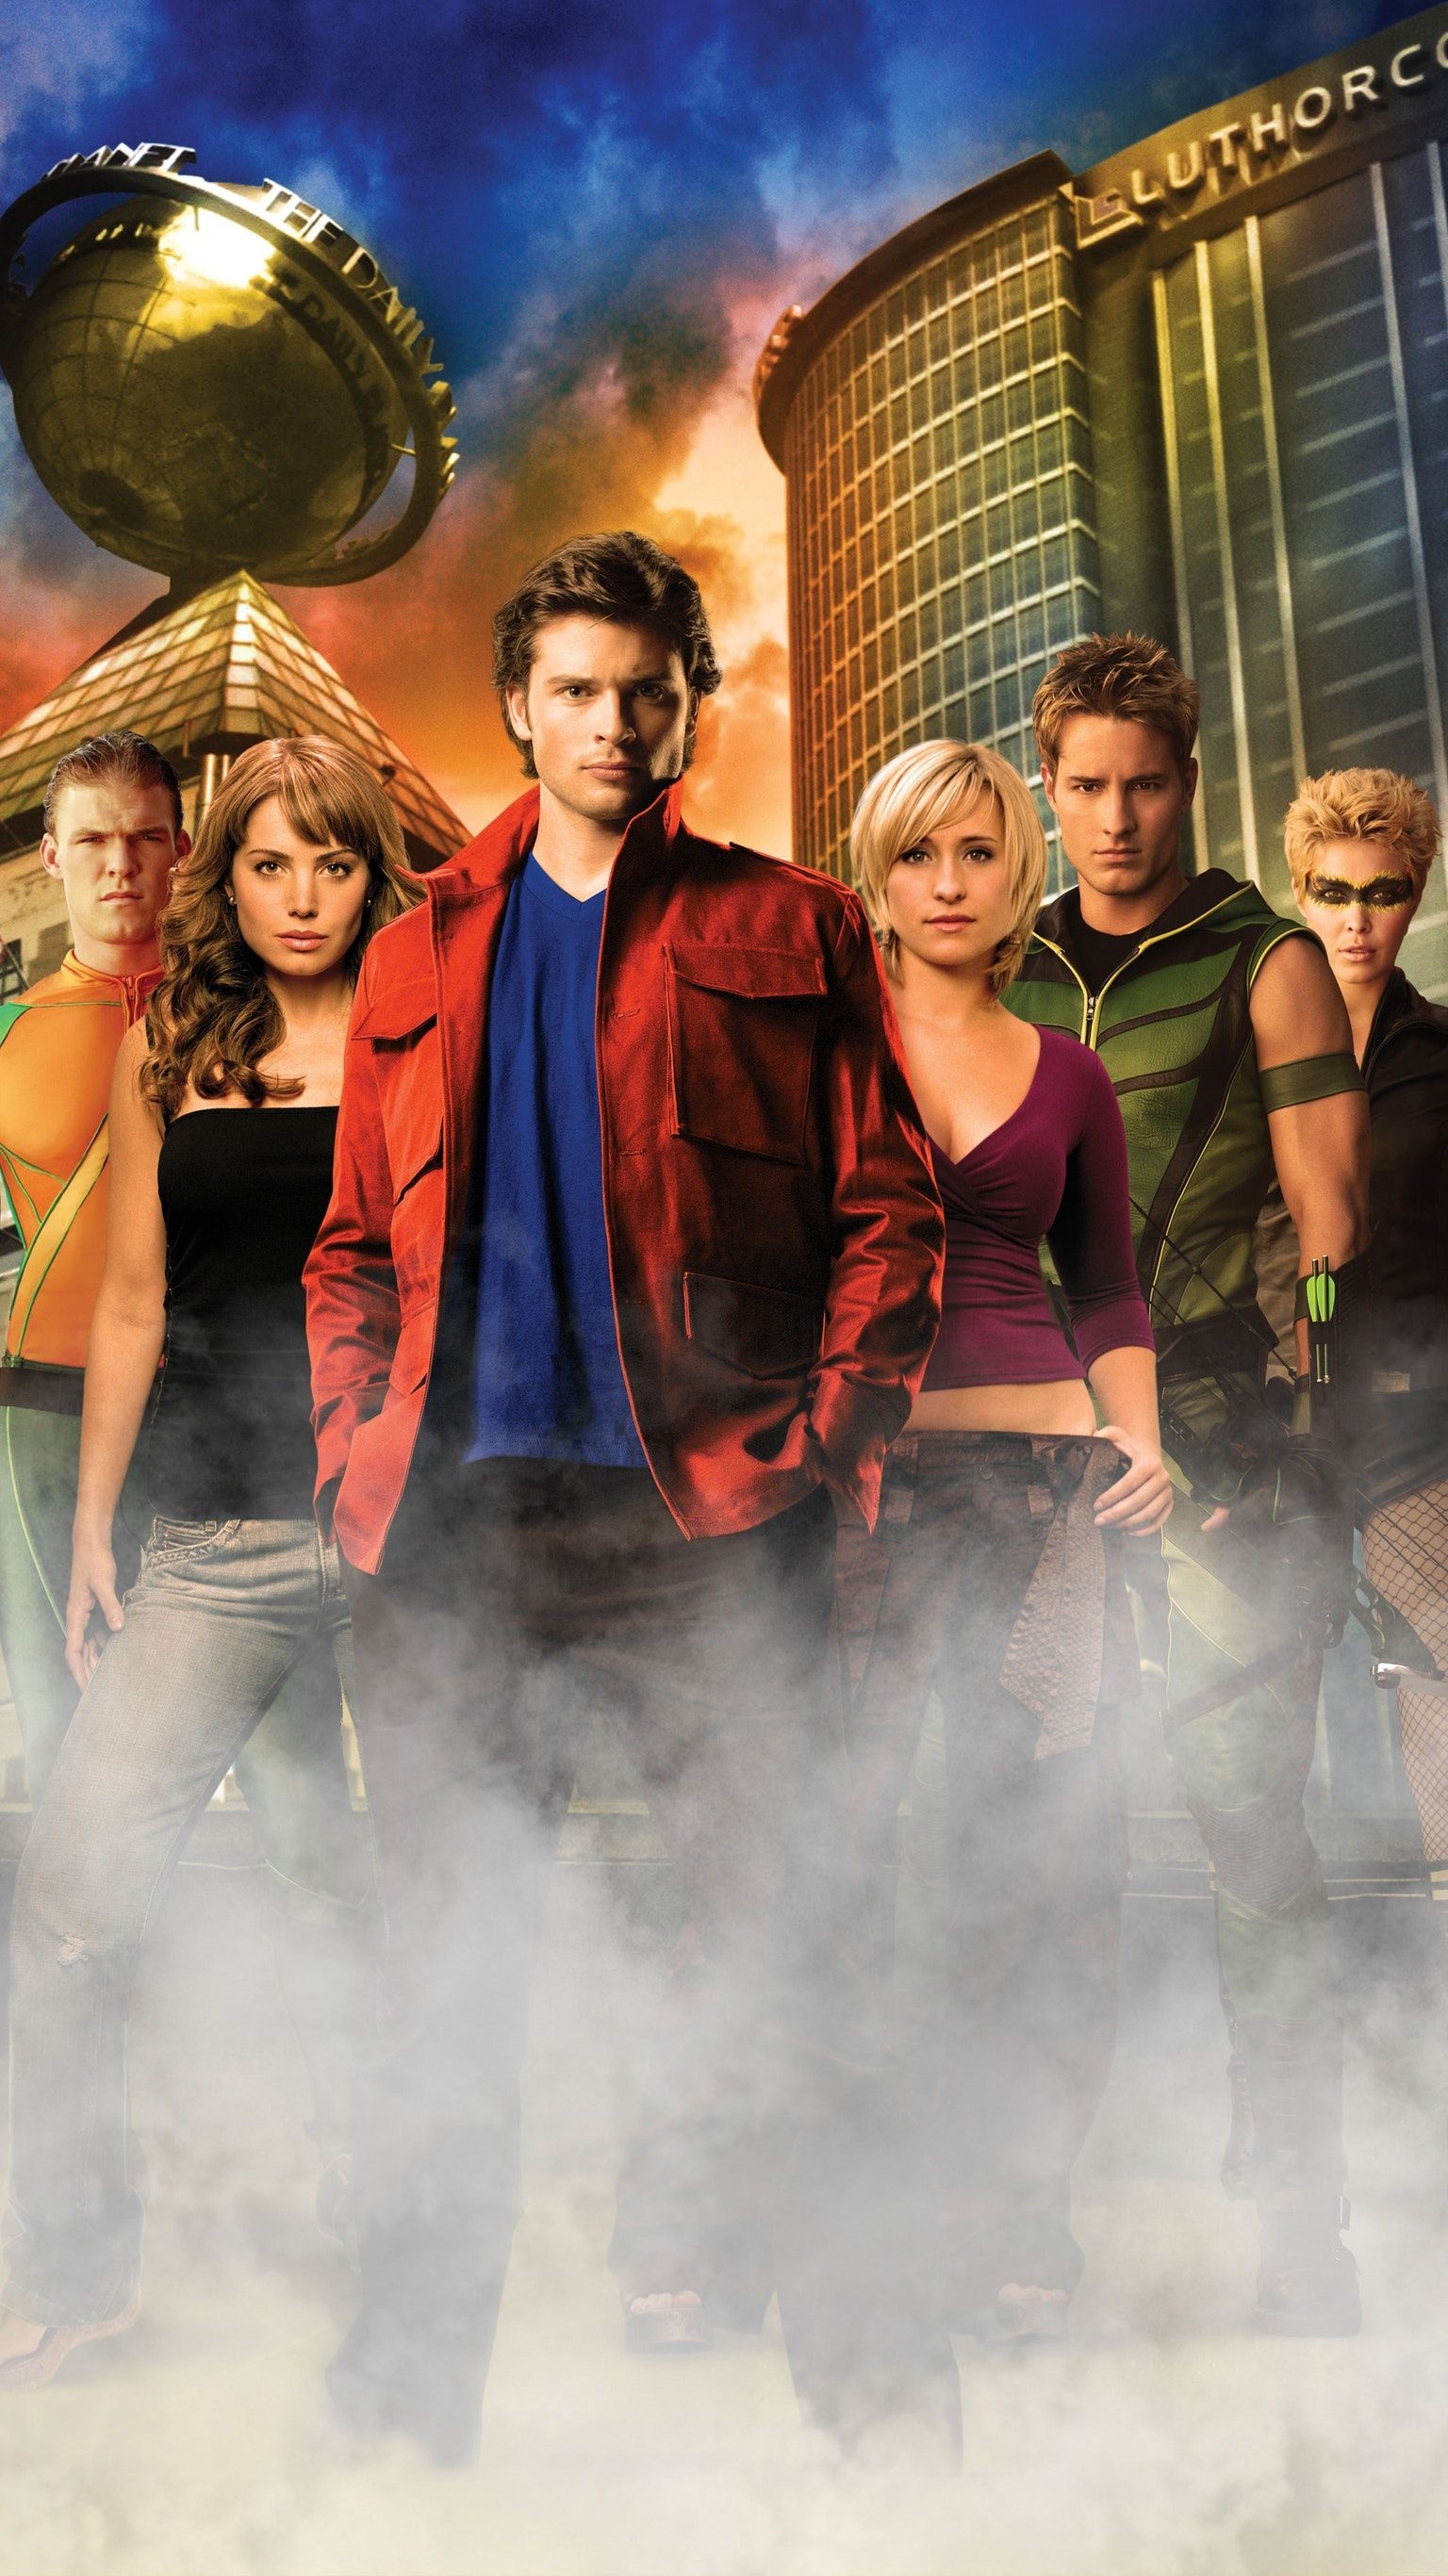 Smallville (TV Series): An interpretation of the Superman story, Popular TV shows and movies. 1540x2740 HD Wallpaper.